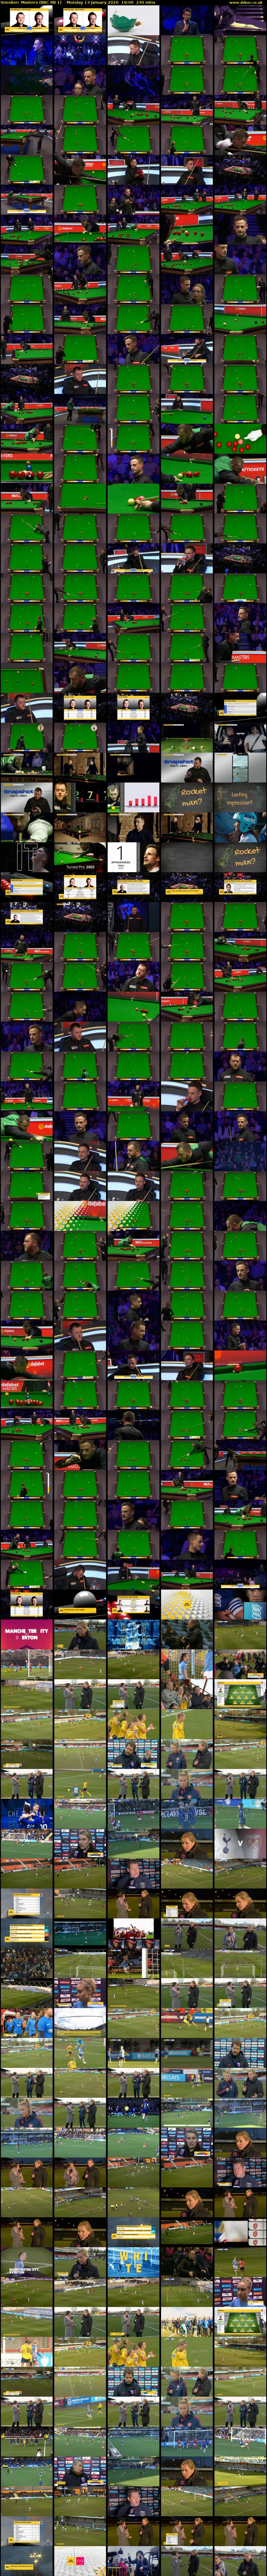 Snooker: Masters (BBC RB 1) Monday 13 January 2020 19:00 - 23:00